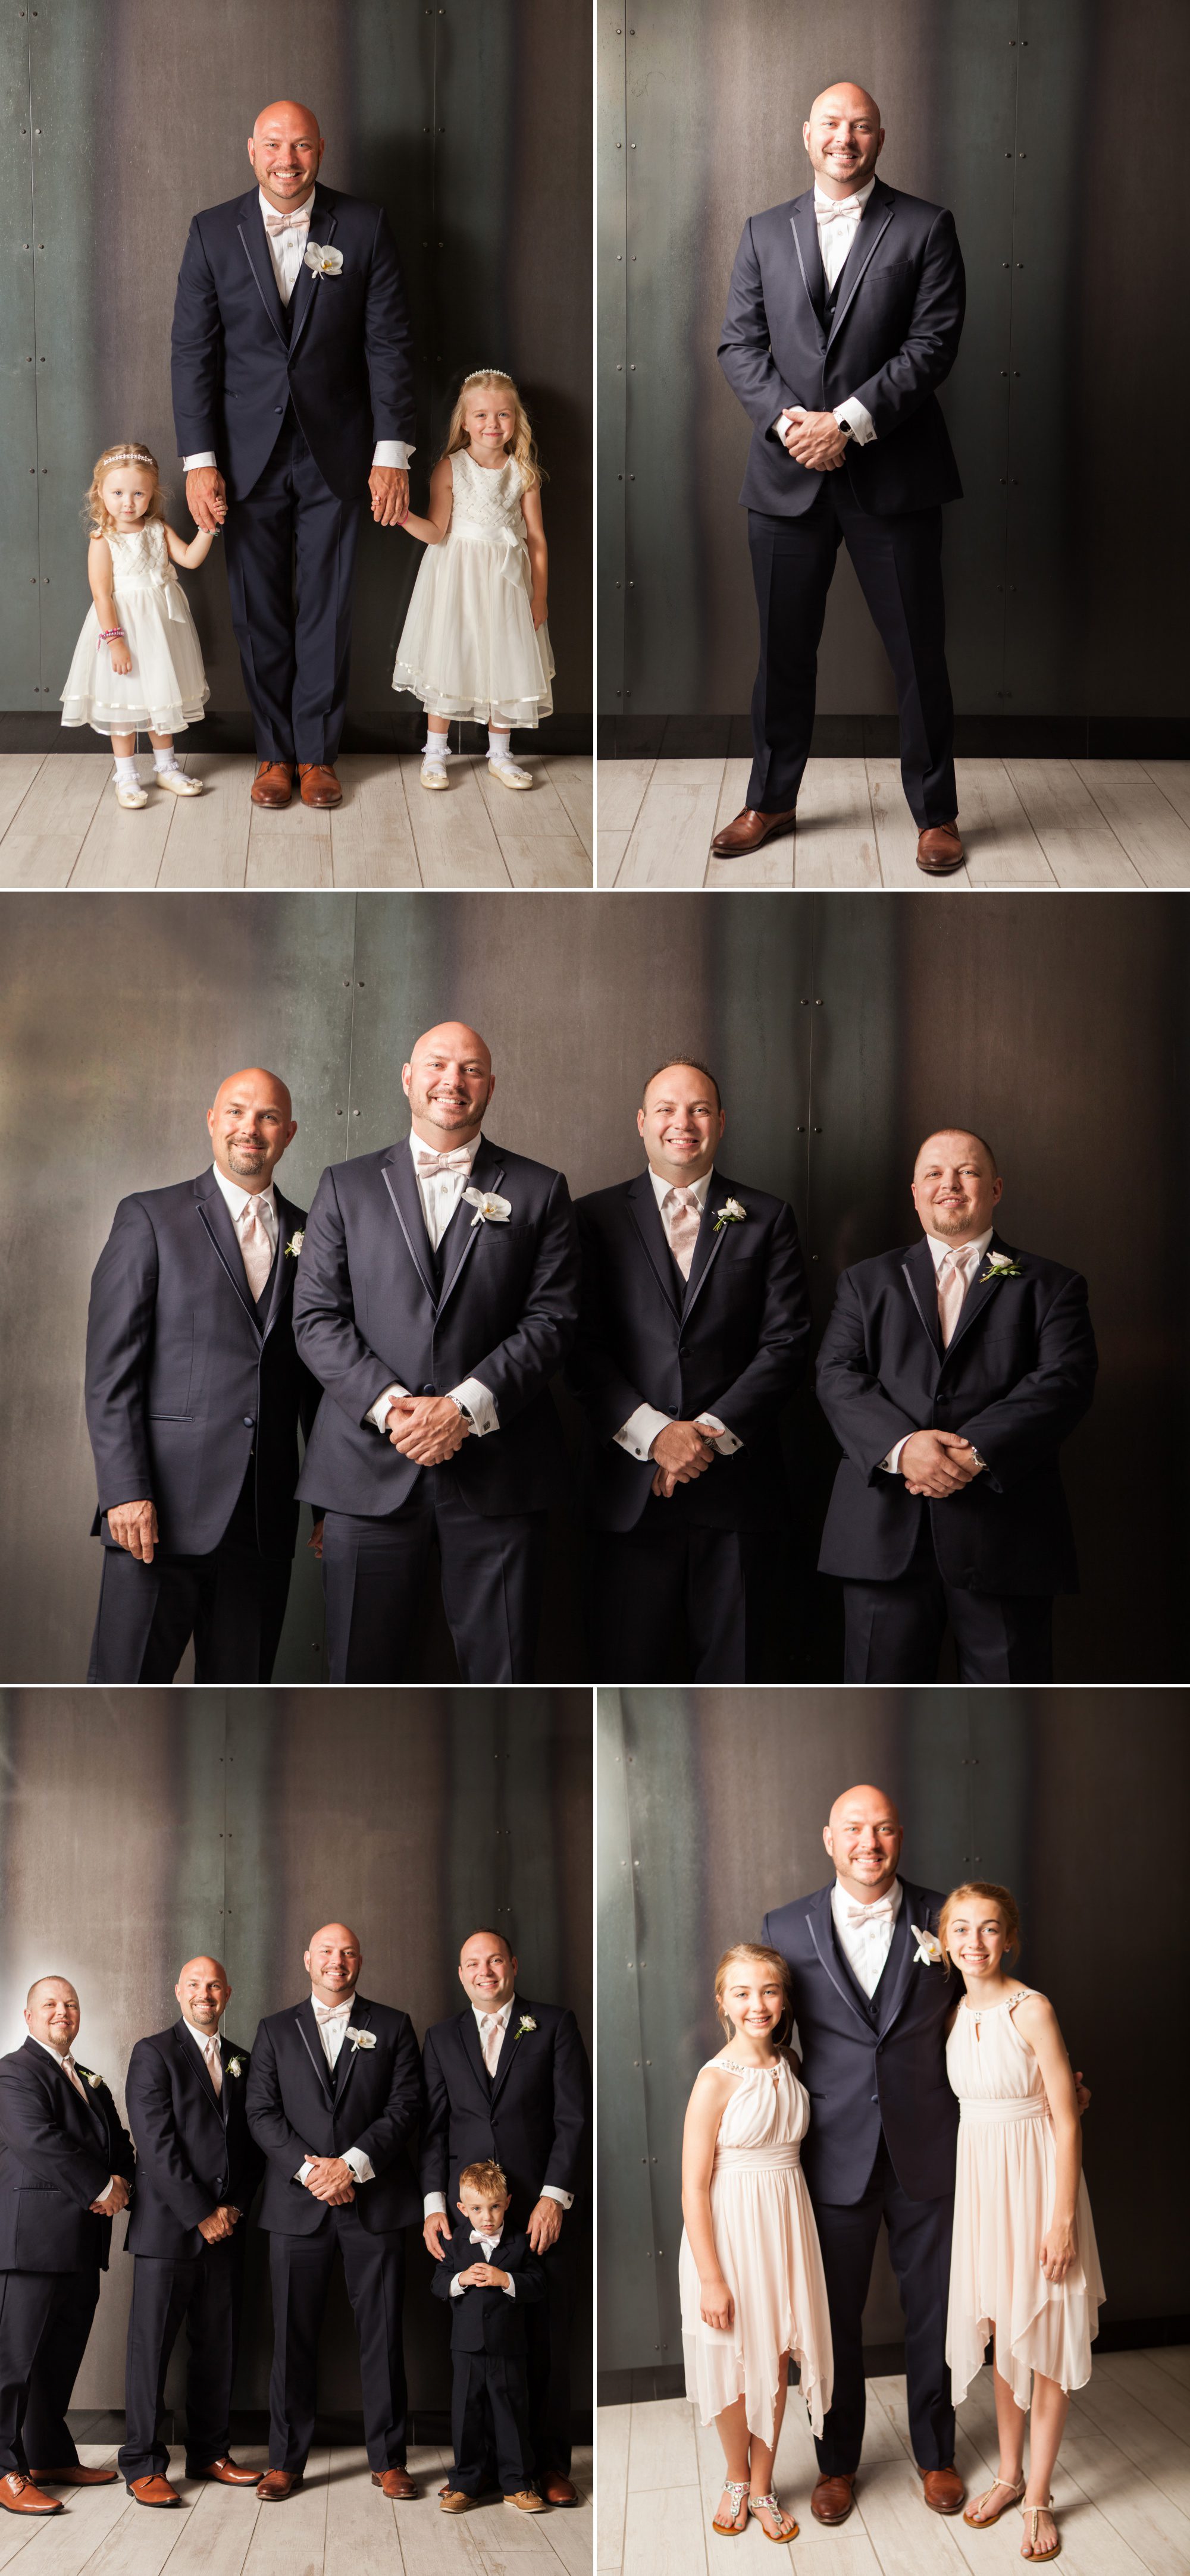 Broom and groomsmen, bridal party photos before wedding ceremony and reception at City Club Nashville. Photos by Krista Lee Photography. 